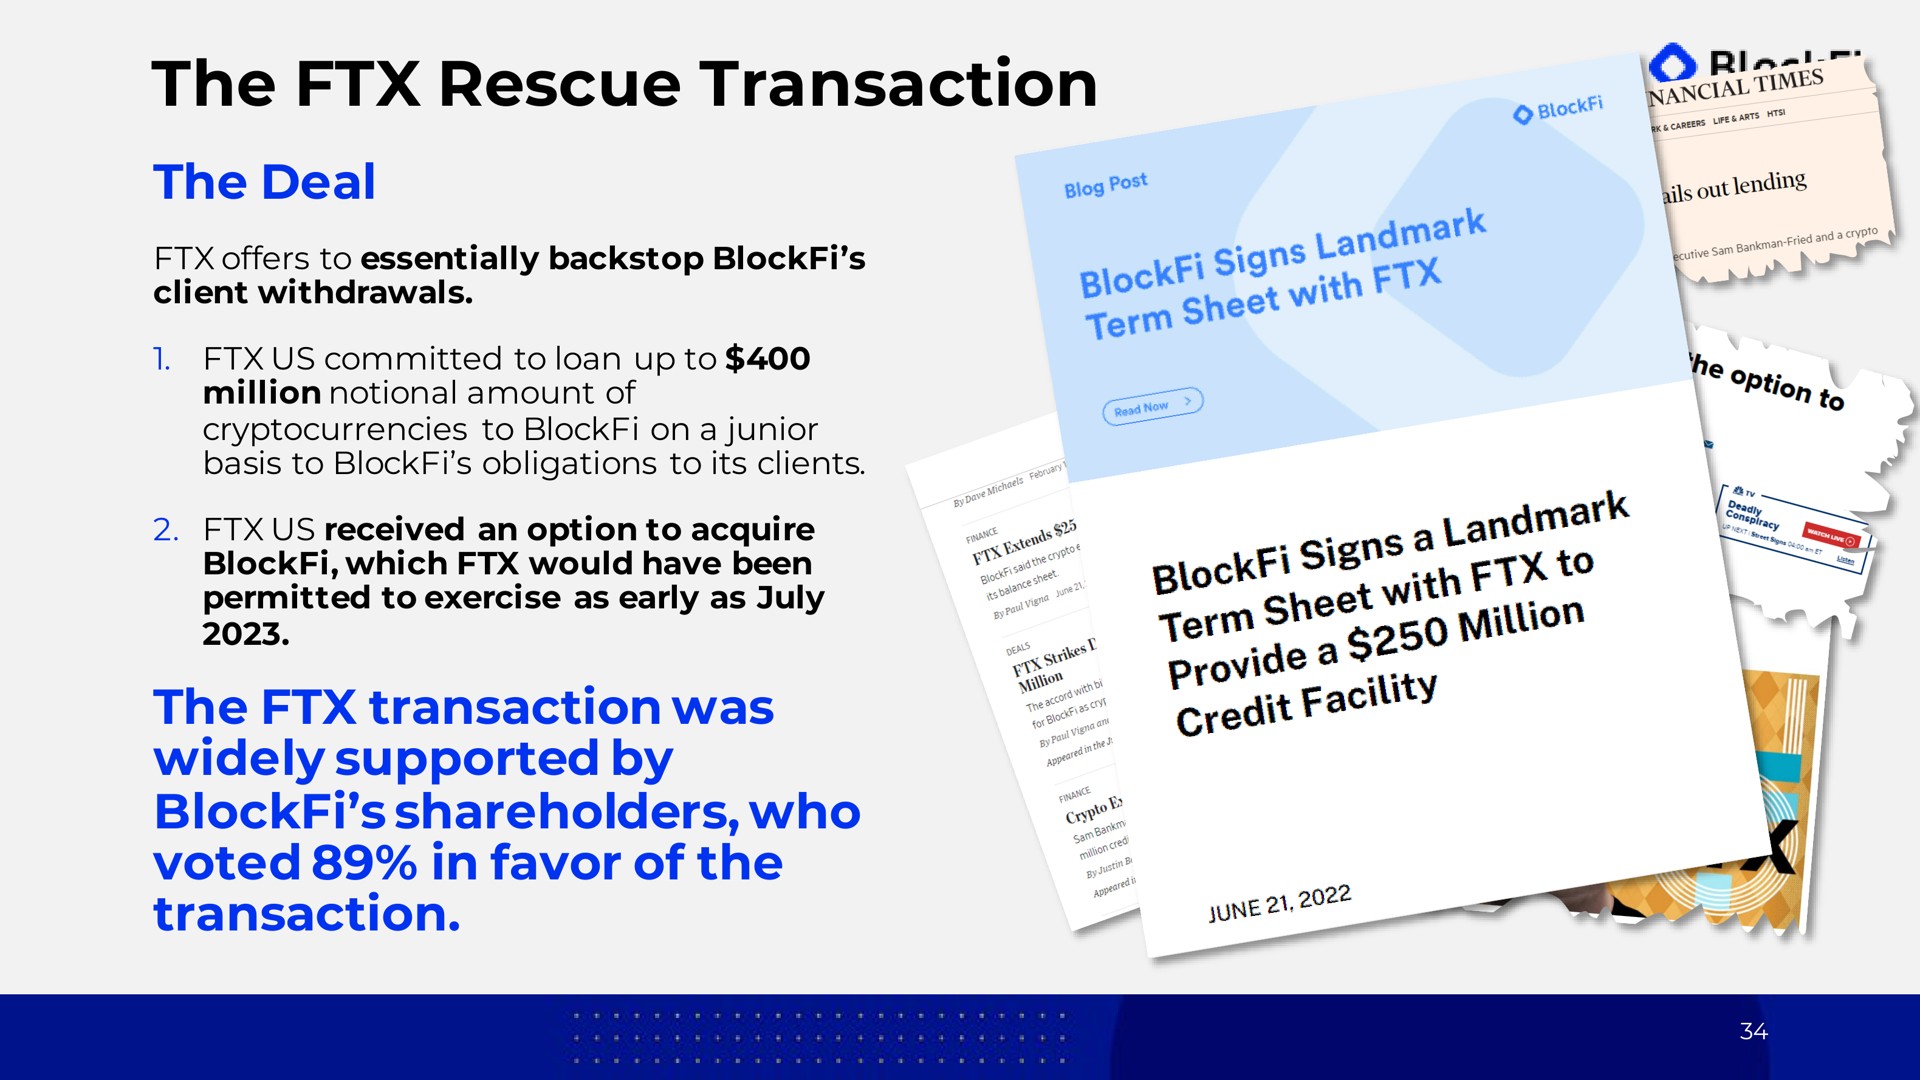 the rescue transaction the deal the transaction was widely supported by shareholders who voted in favor of the transaction ais client withdrawals sheet with blow provide facility we woe | BlockFi